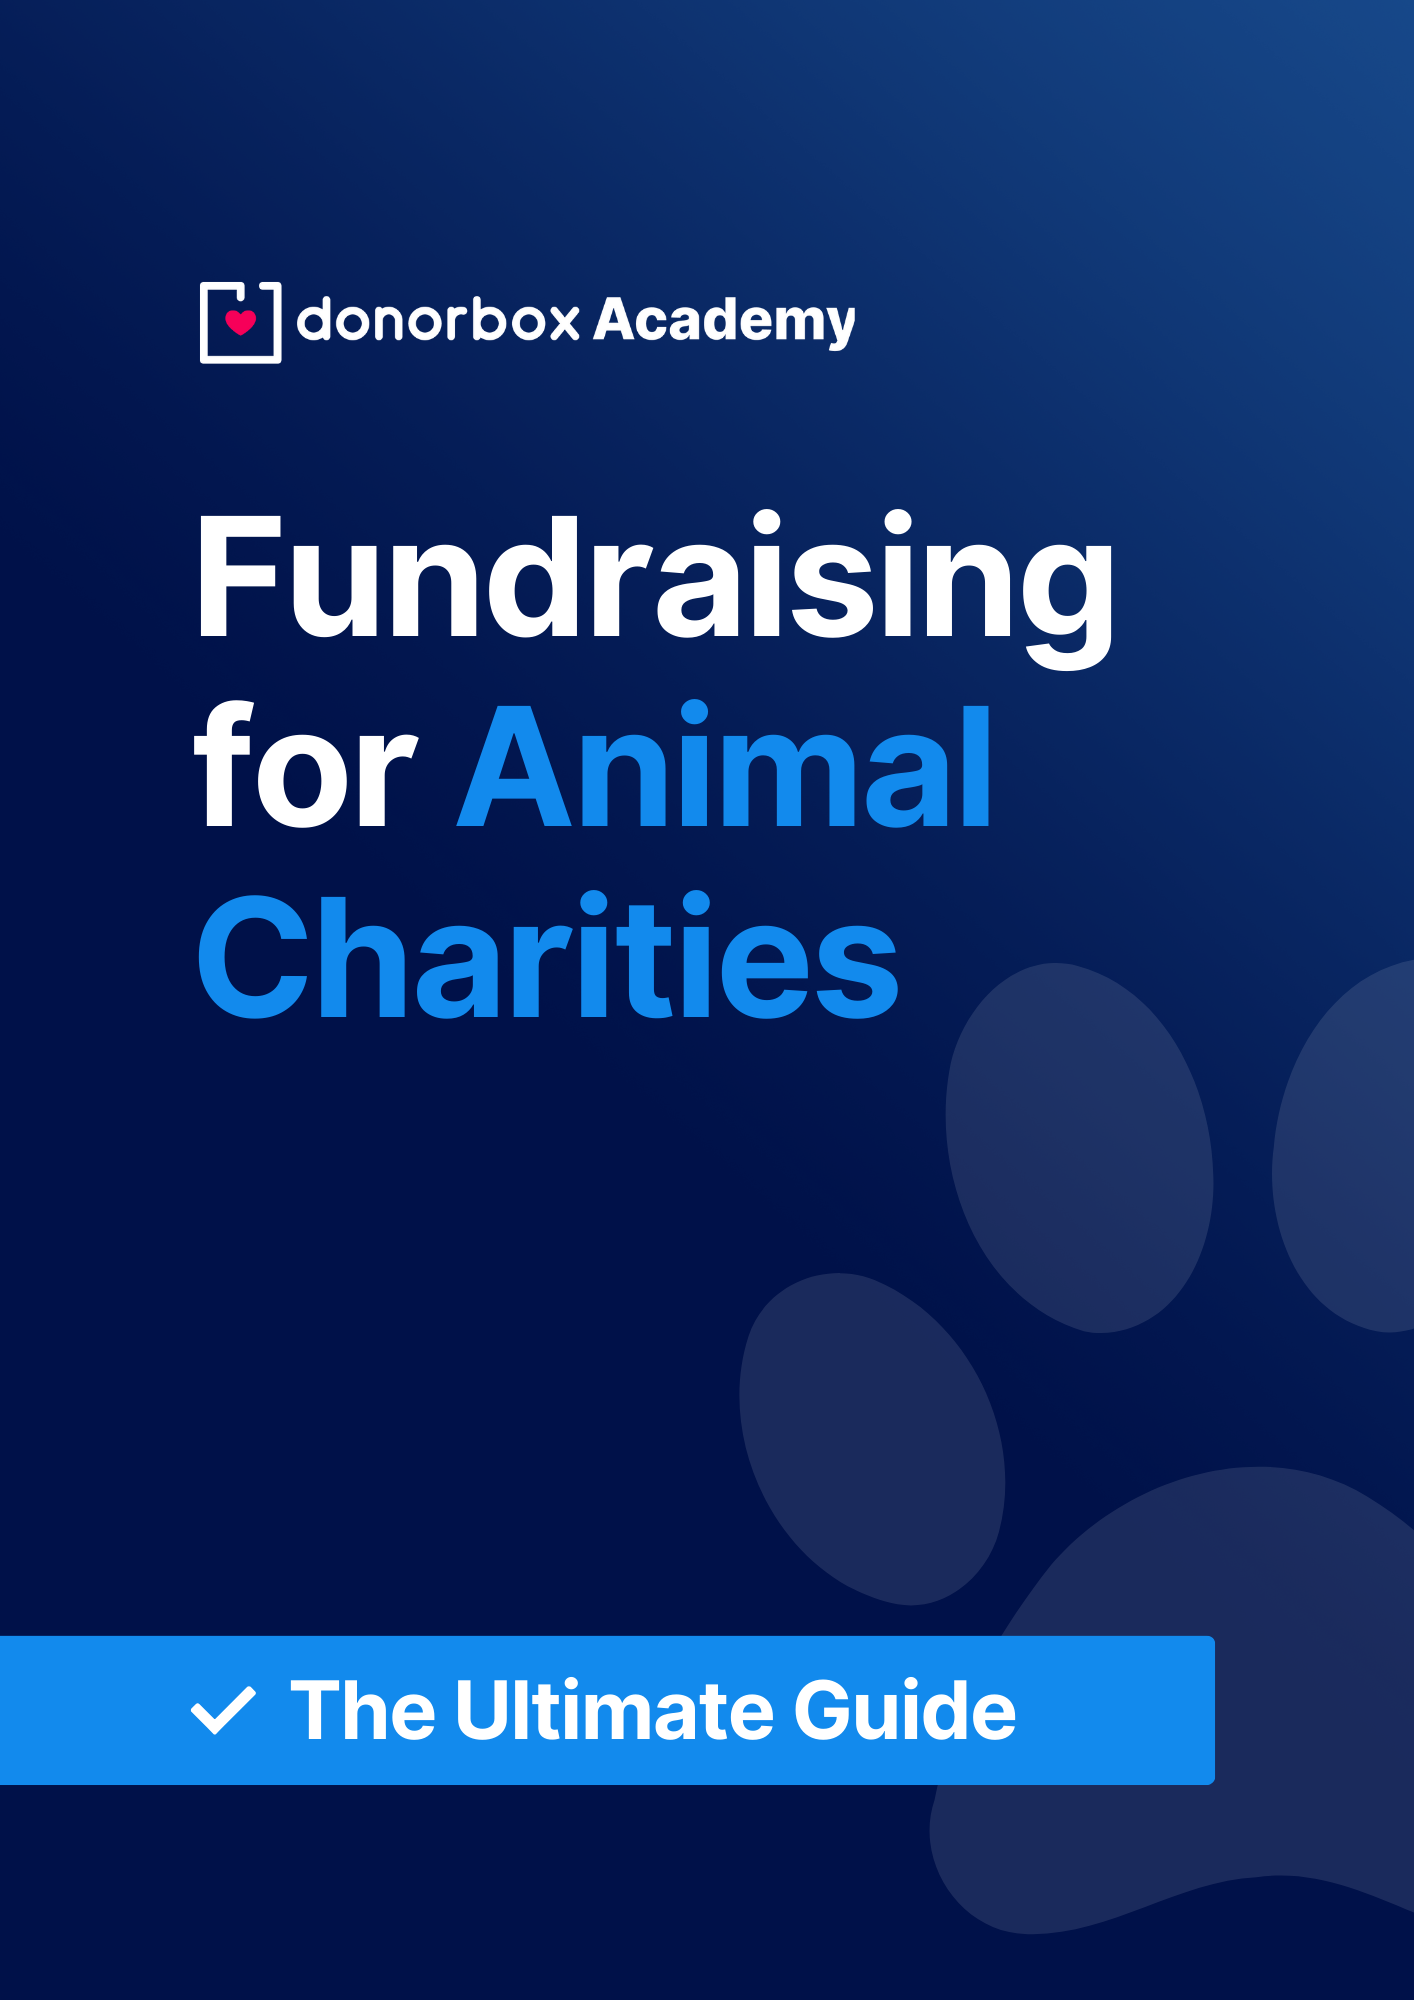 The Ultimate Guide to Fundraising for Animal Charities